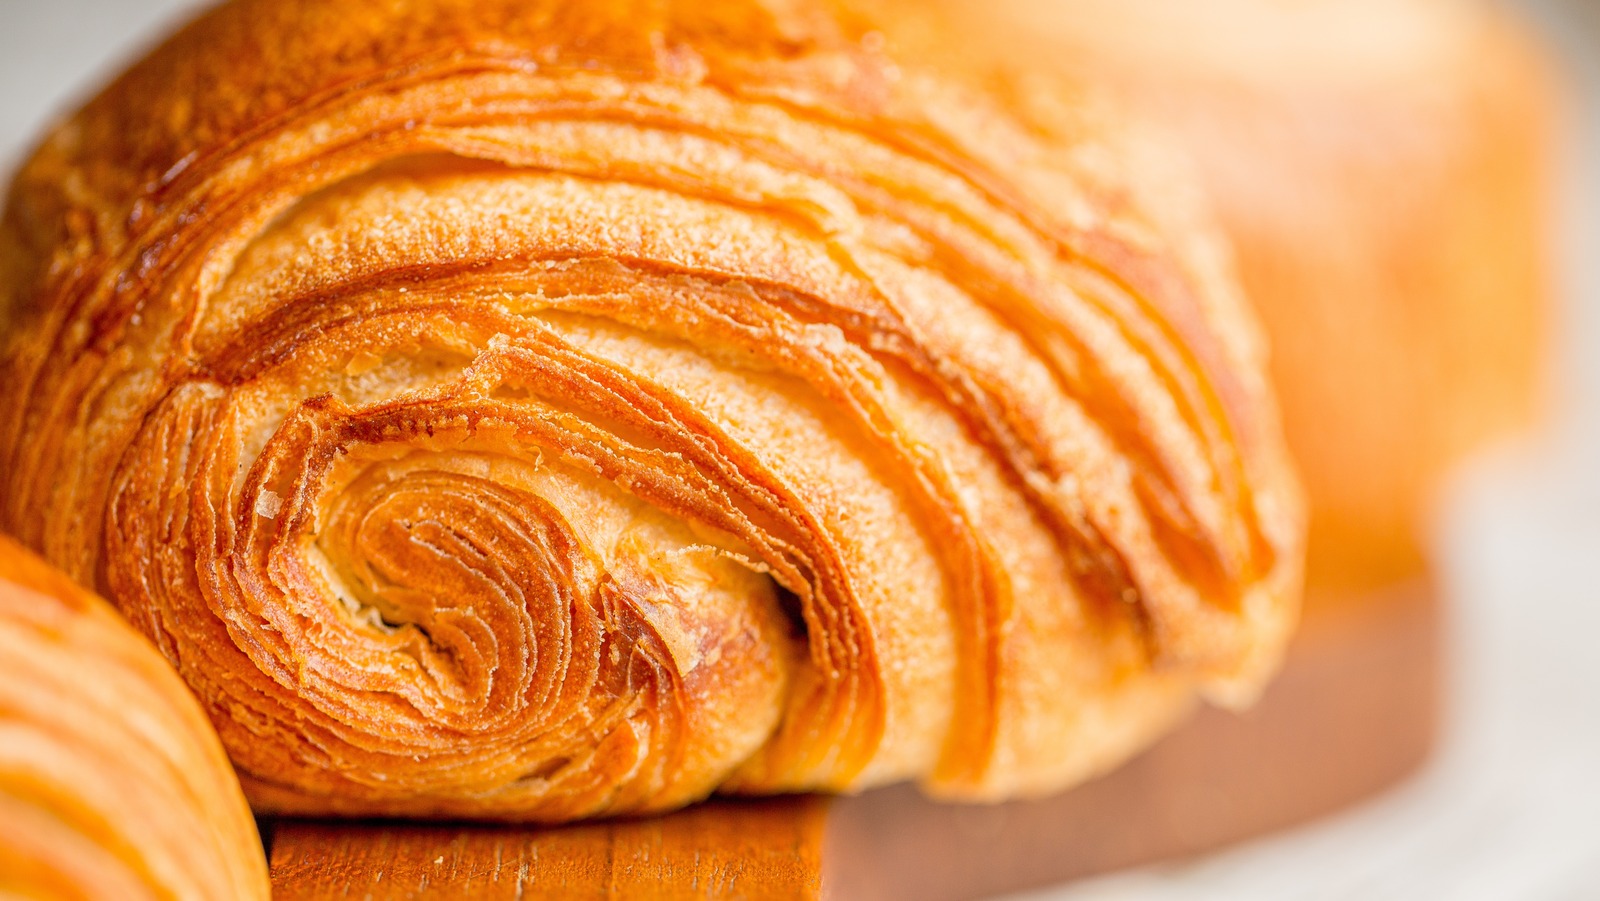 A Loaf Pan Can Transform Leftover Croissant Dough Into A Fluffy Bread - Tasting Table